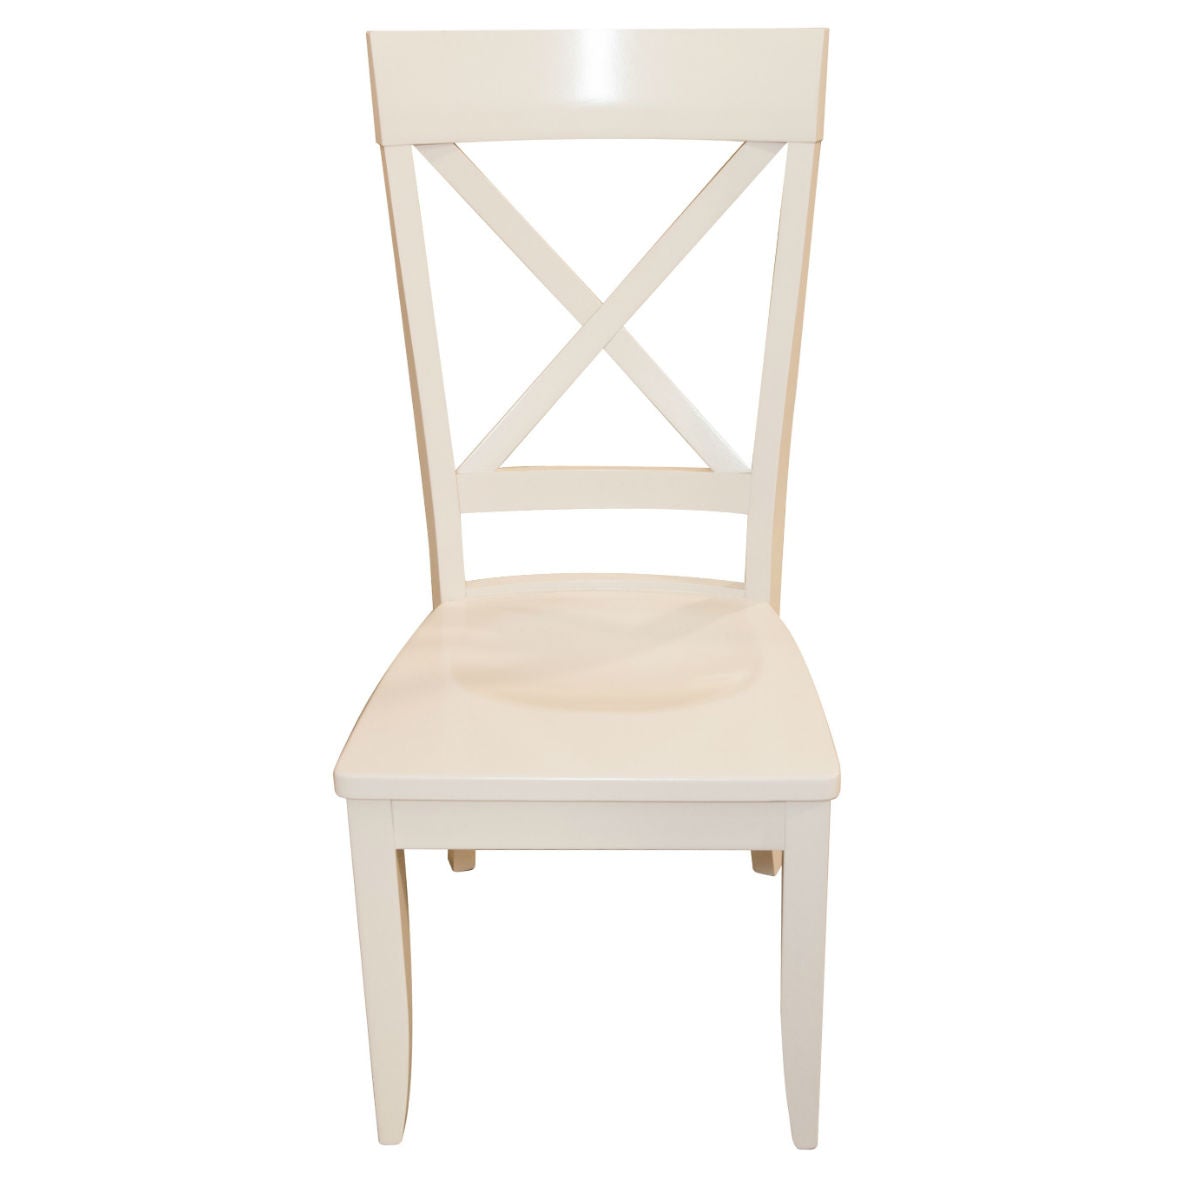 Farmhouse Style white cross back chair Dining